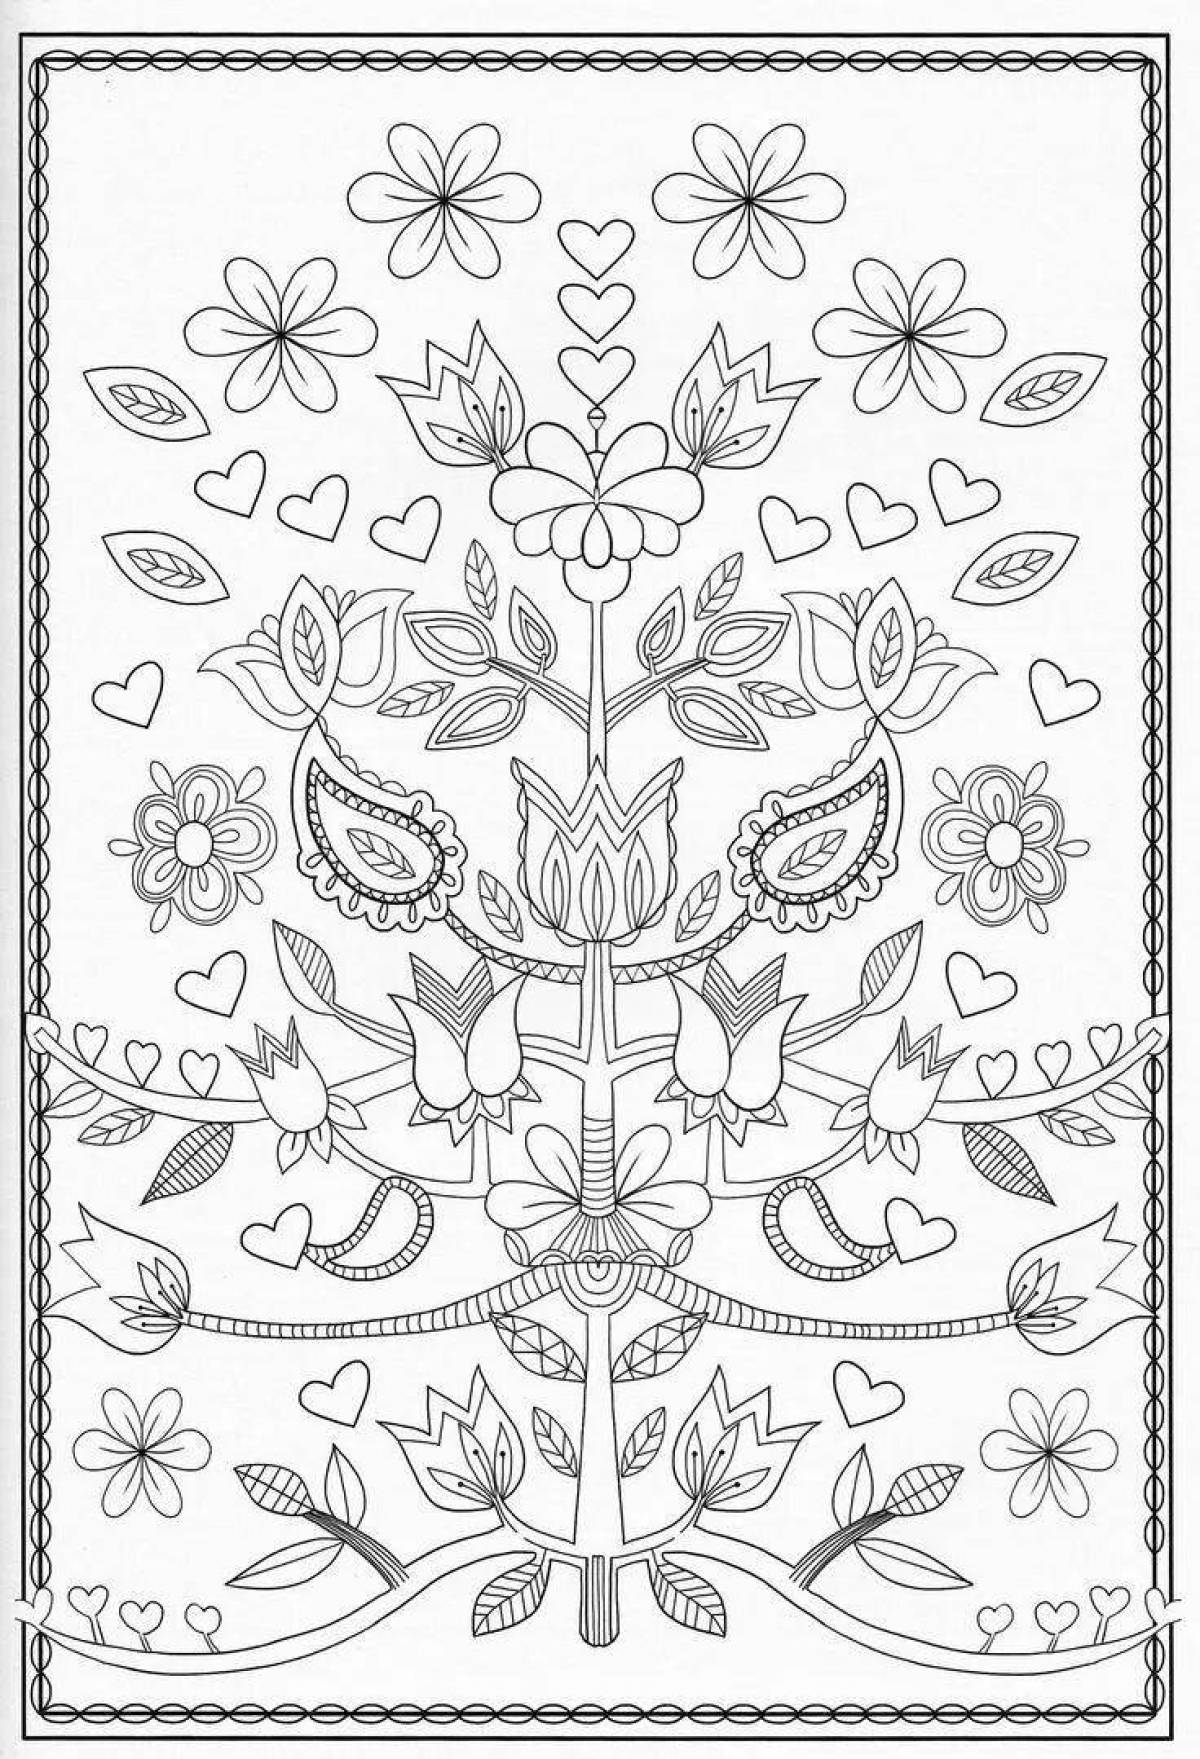 Delightful embroidery coloring